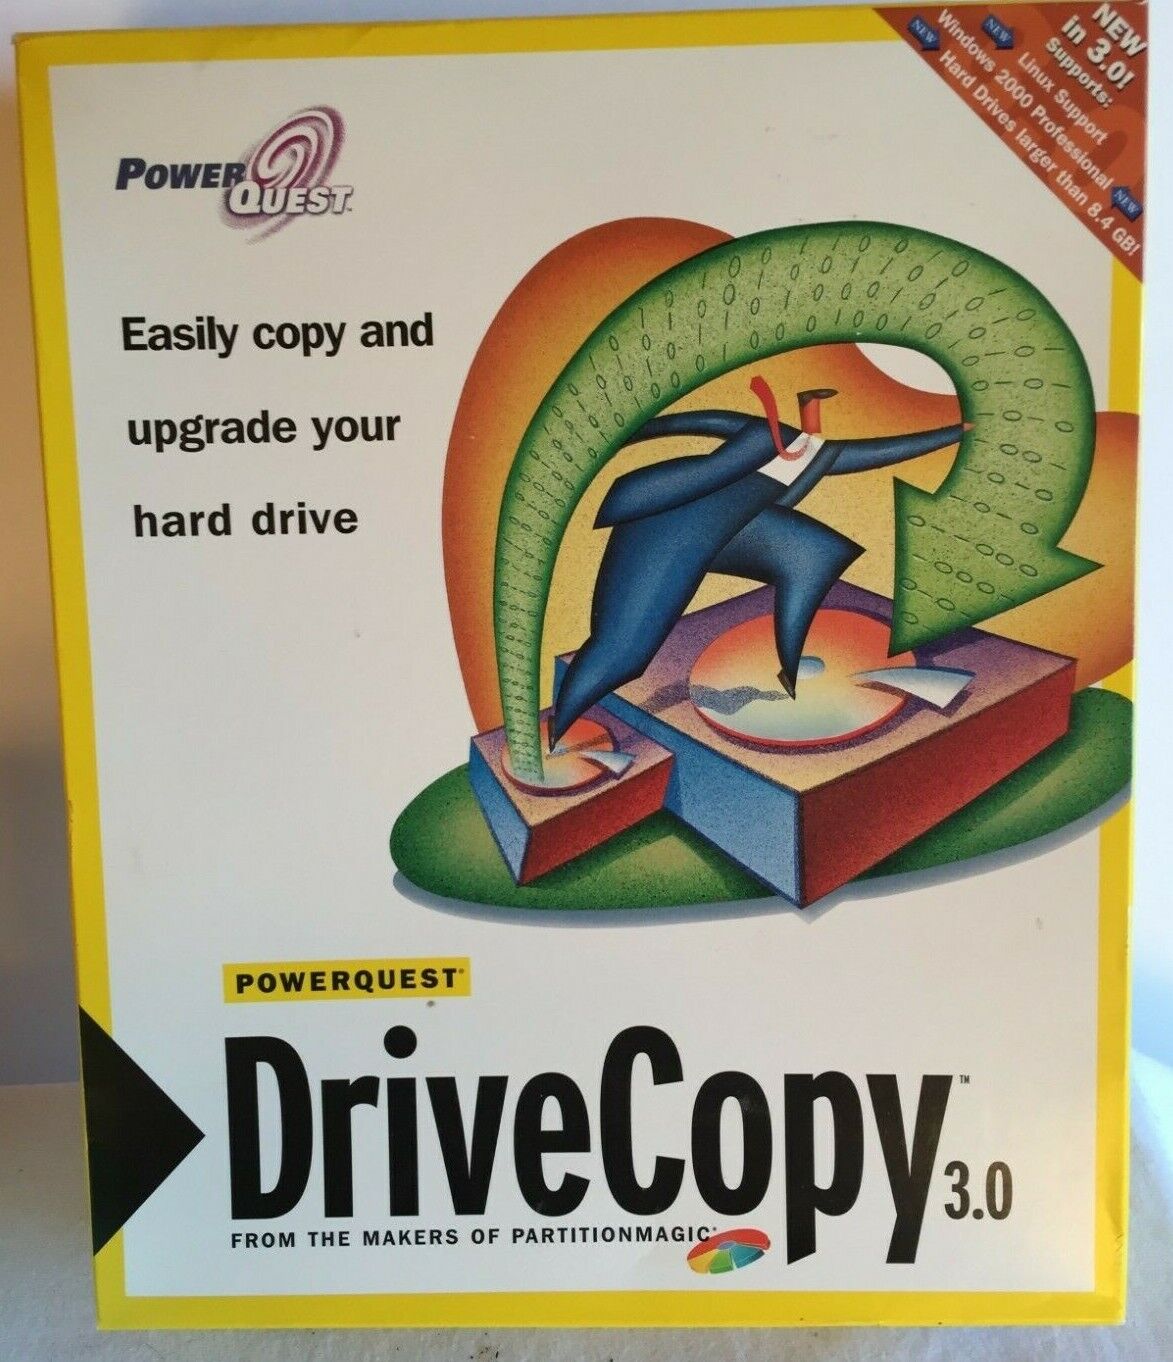 Power Quest Drive Copy 3.0 CD + User Guide - VTG 1990\'s Drive Copy HDD Software